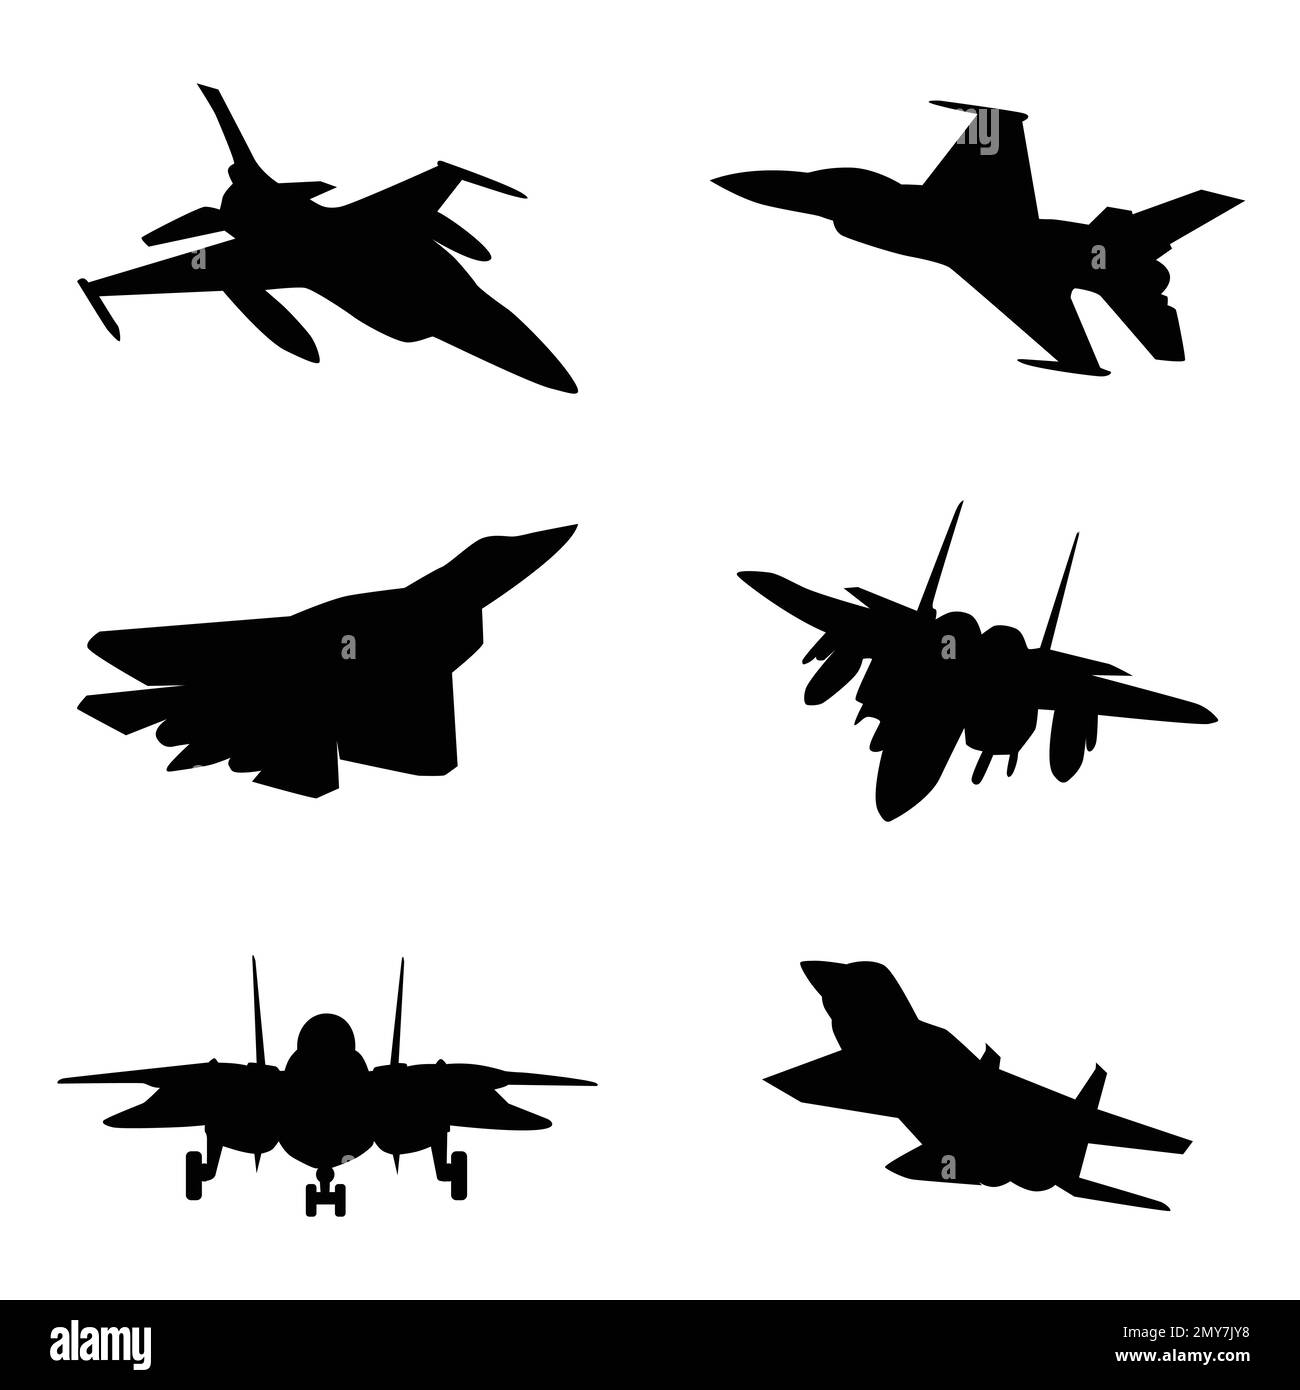 Fighter jet aircraft silhouette vector on white background Stock Vector